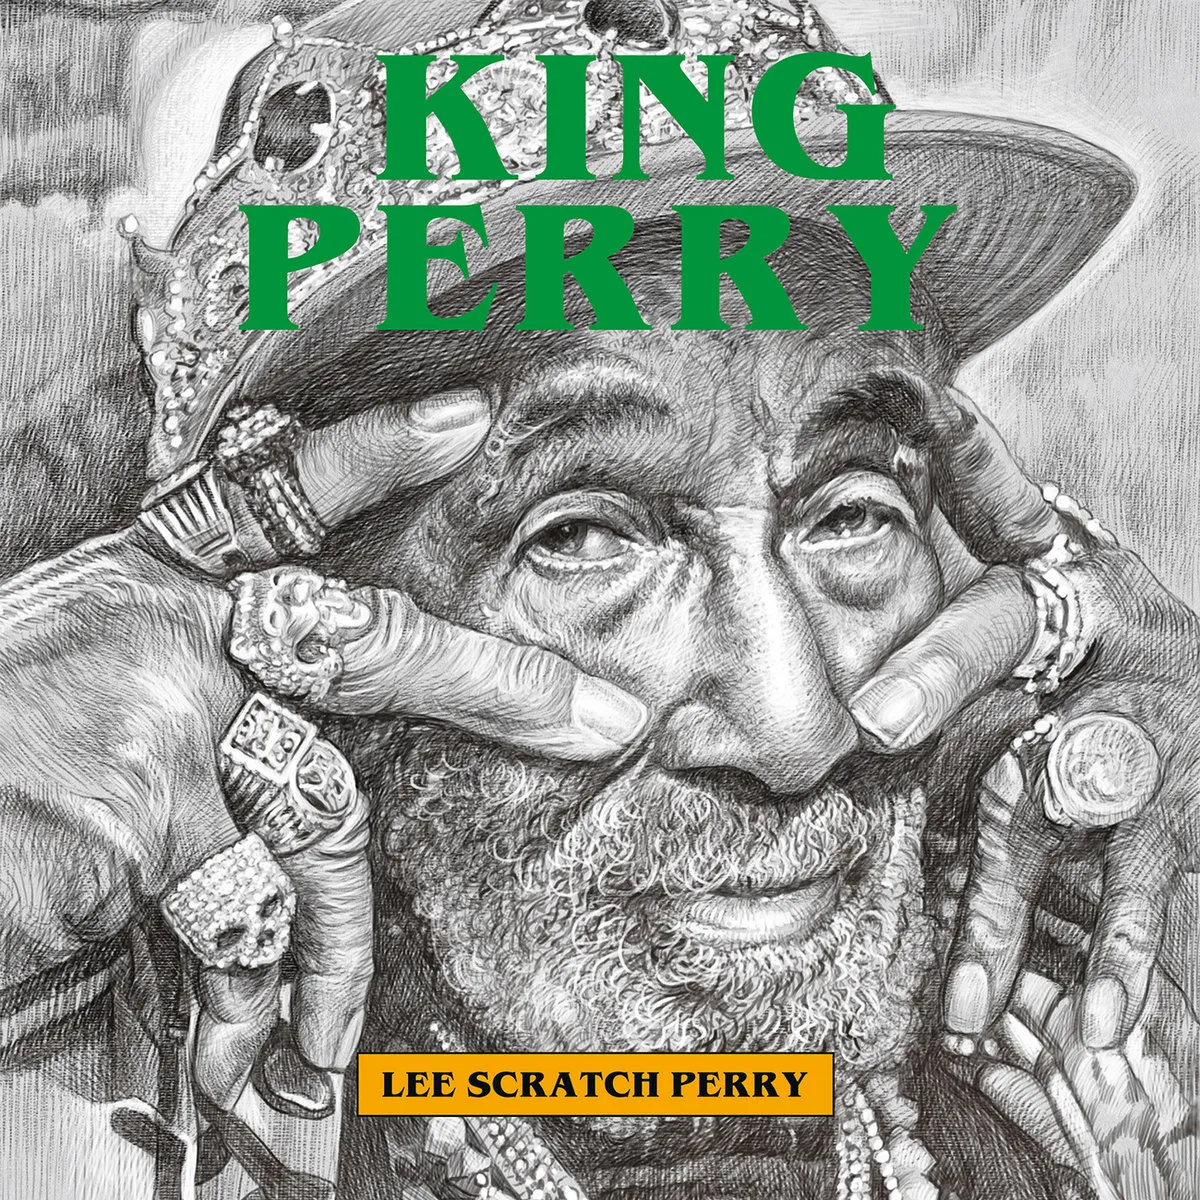 LEE SCRATCH PERRY / KING PERRY 